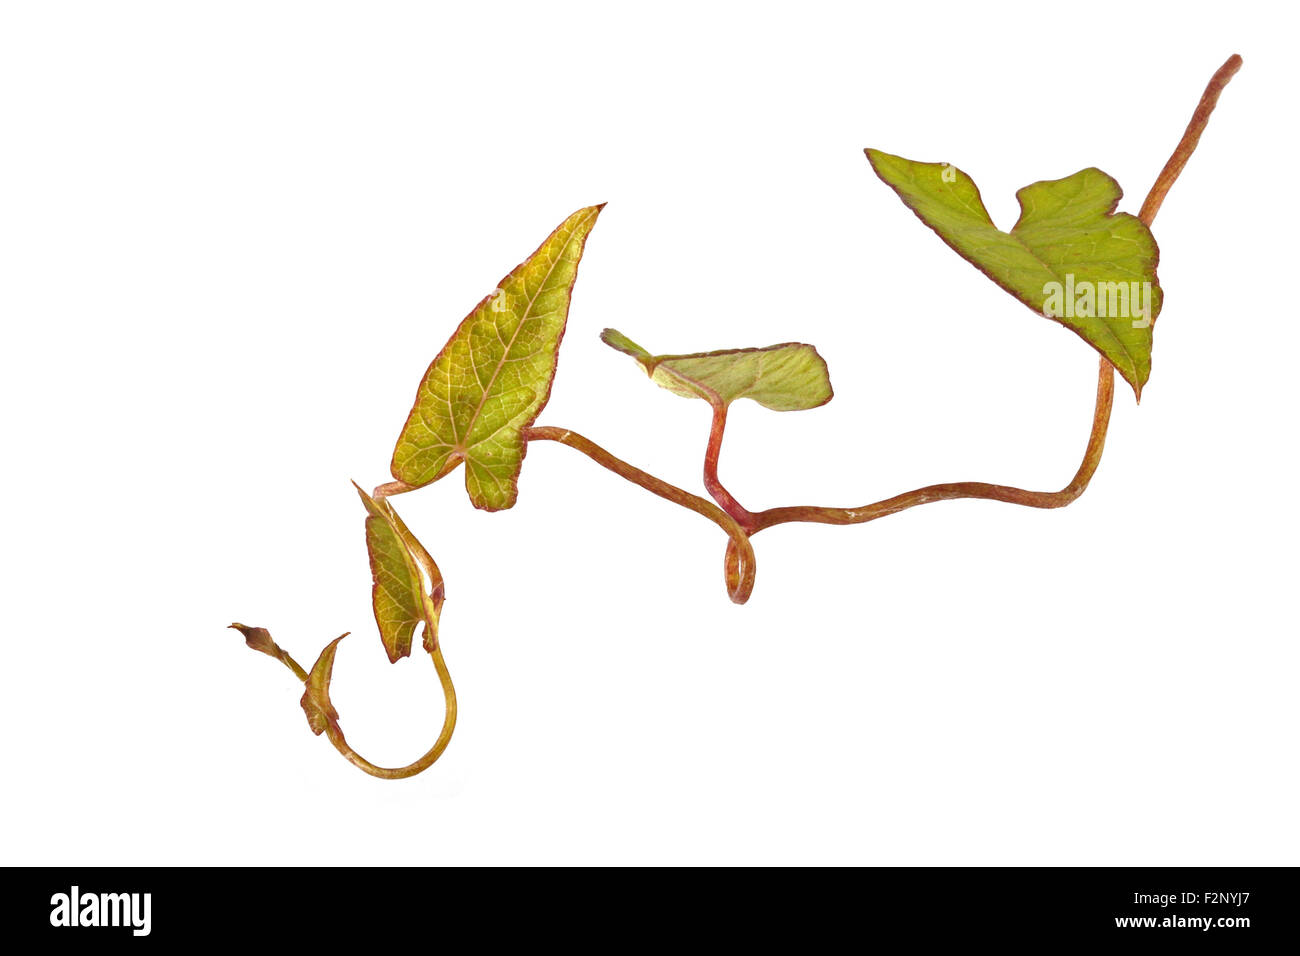 Bind weed on a plain white background. Stock Photo